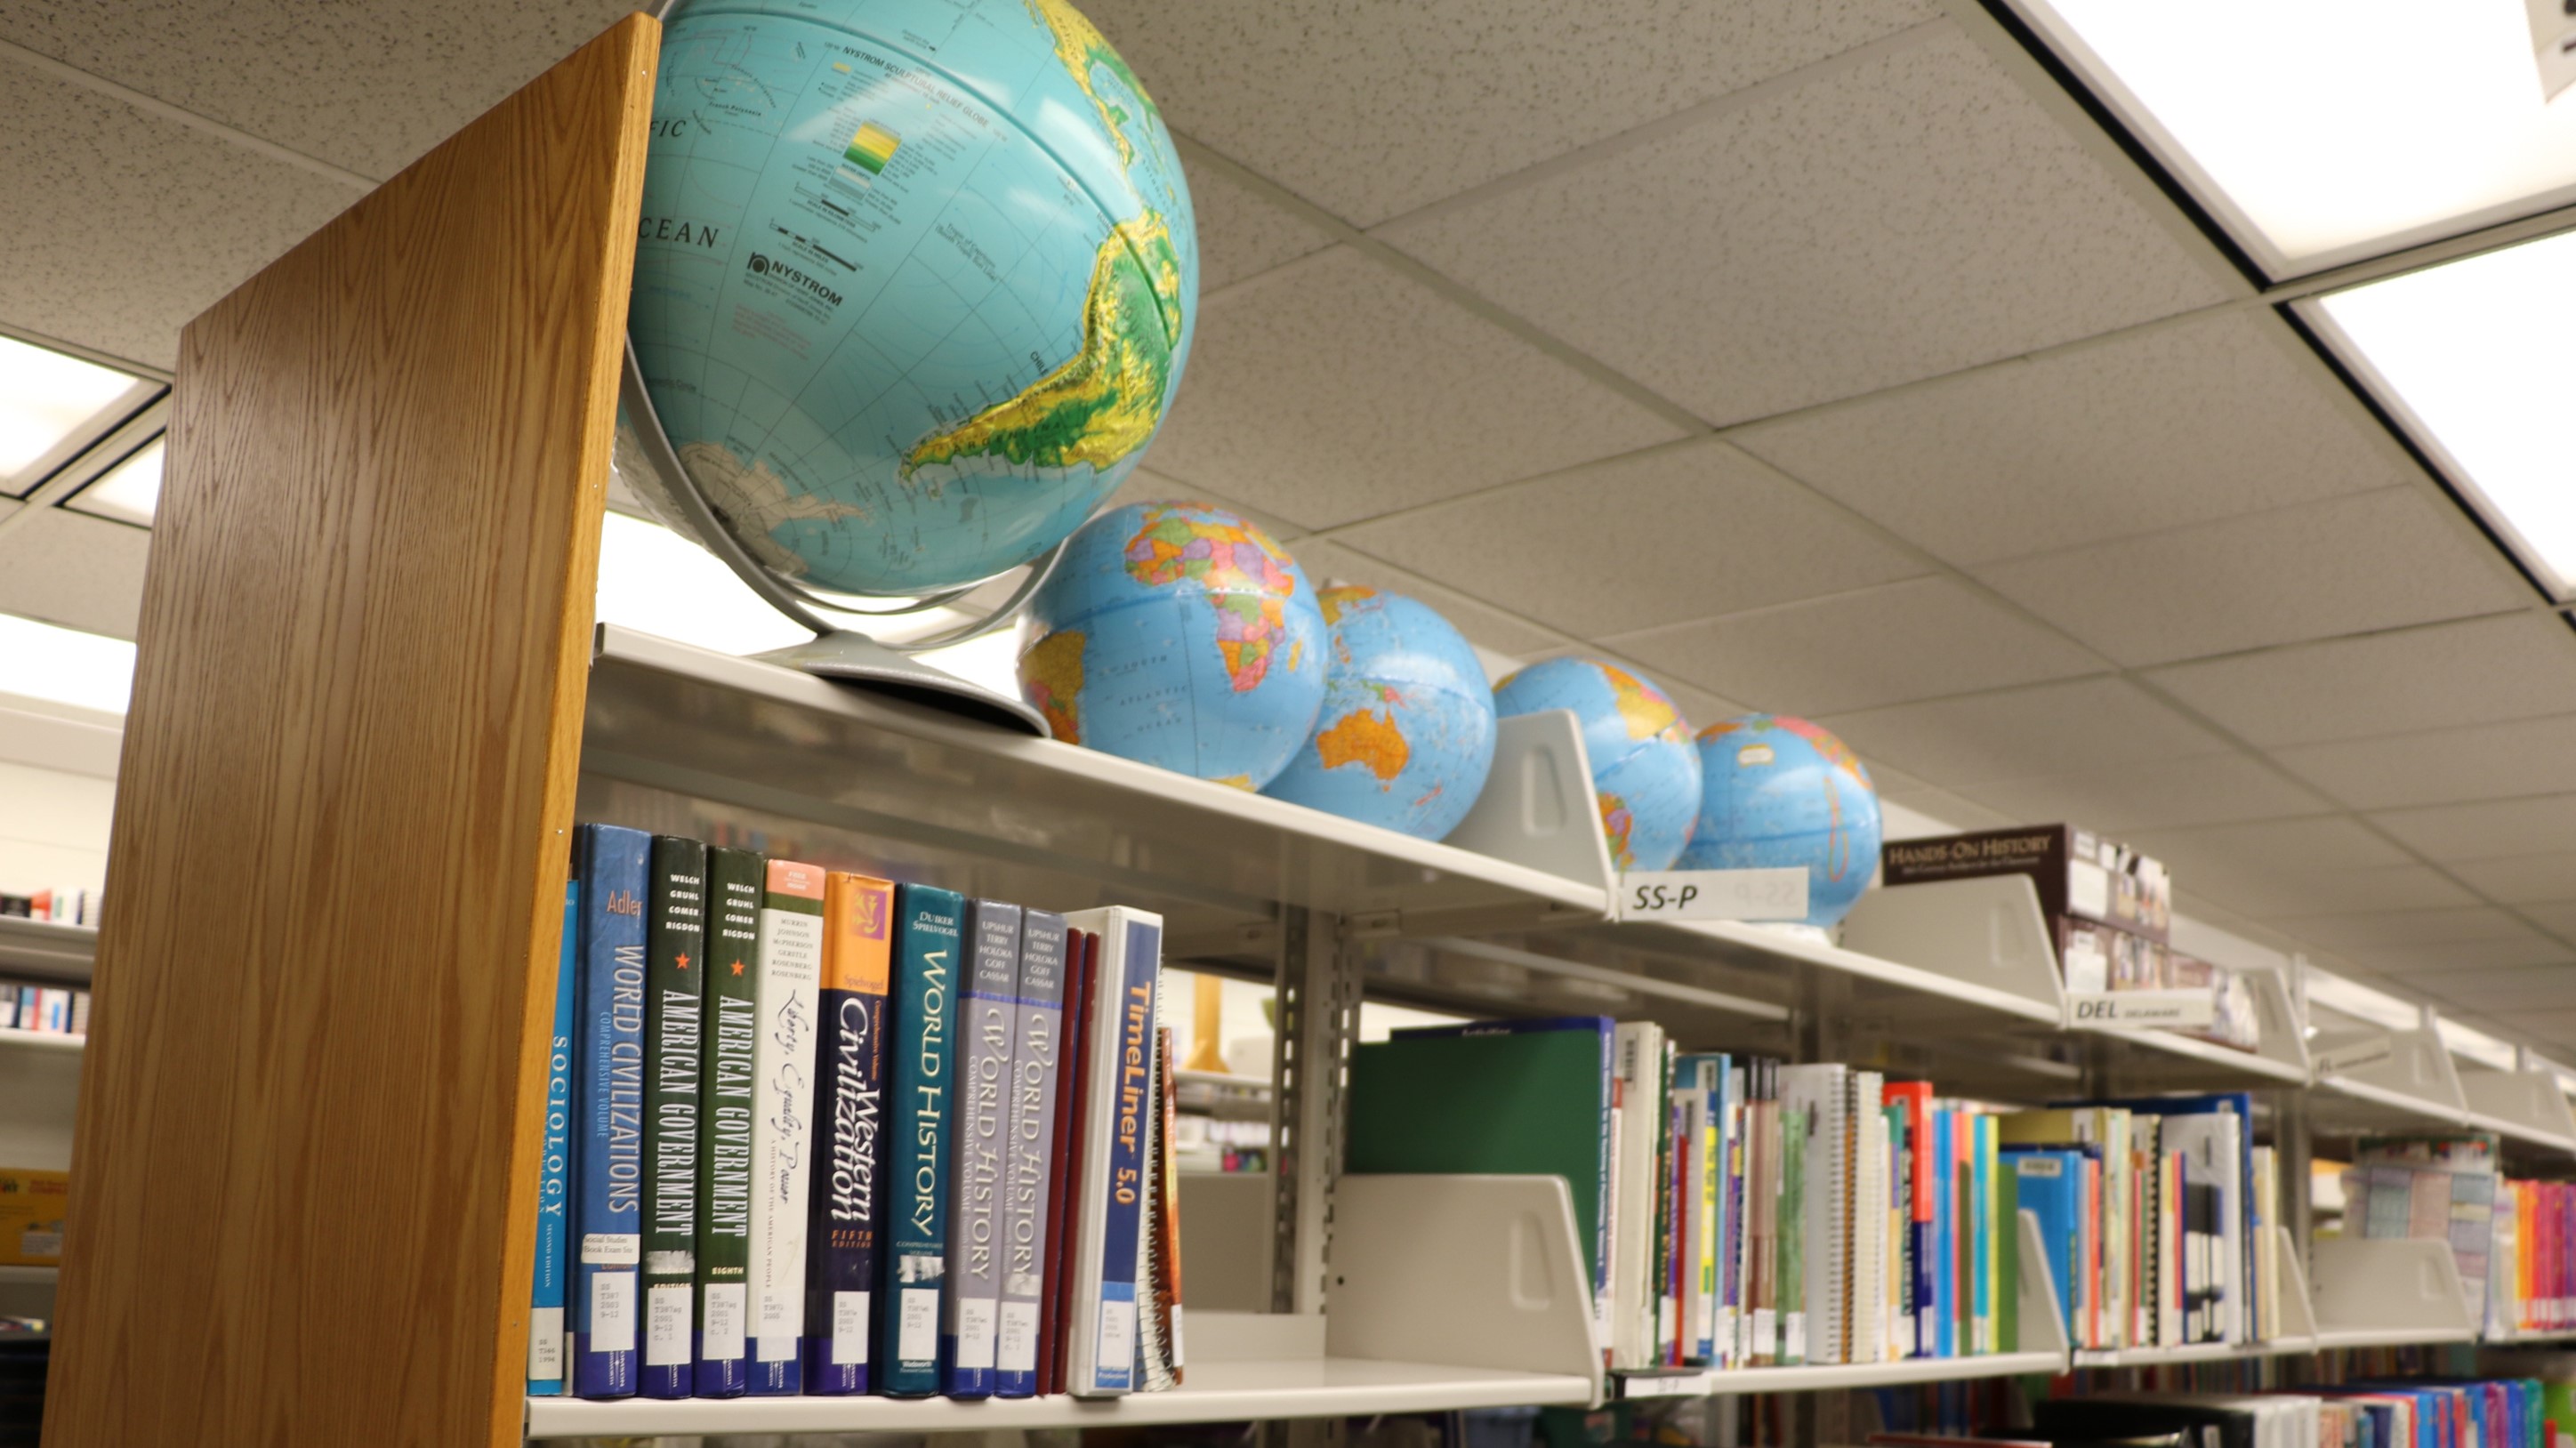 This image shows a row of resources at the Educational Resource Center, which include globes and World History reference books.